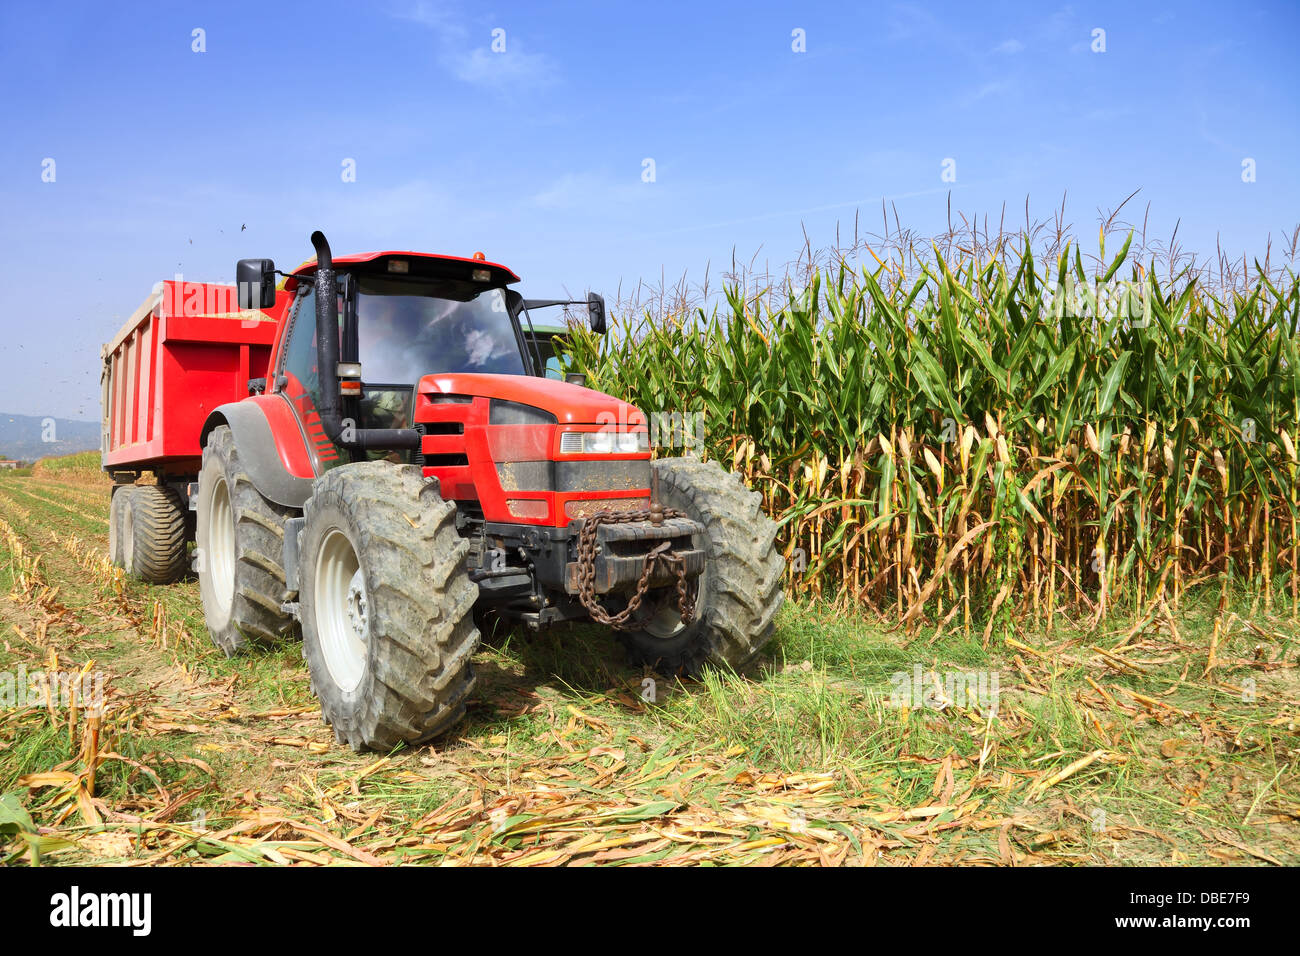 Agriculture, farming tractor Stock Photo